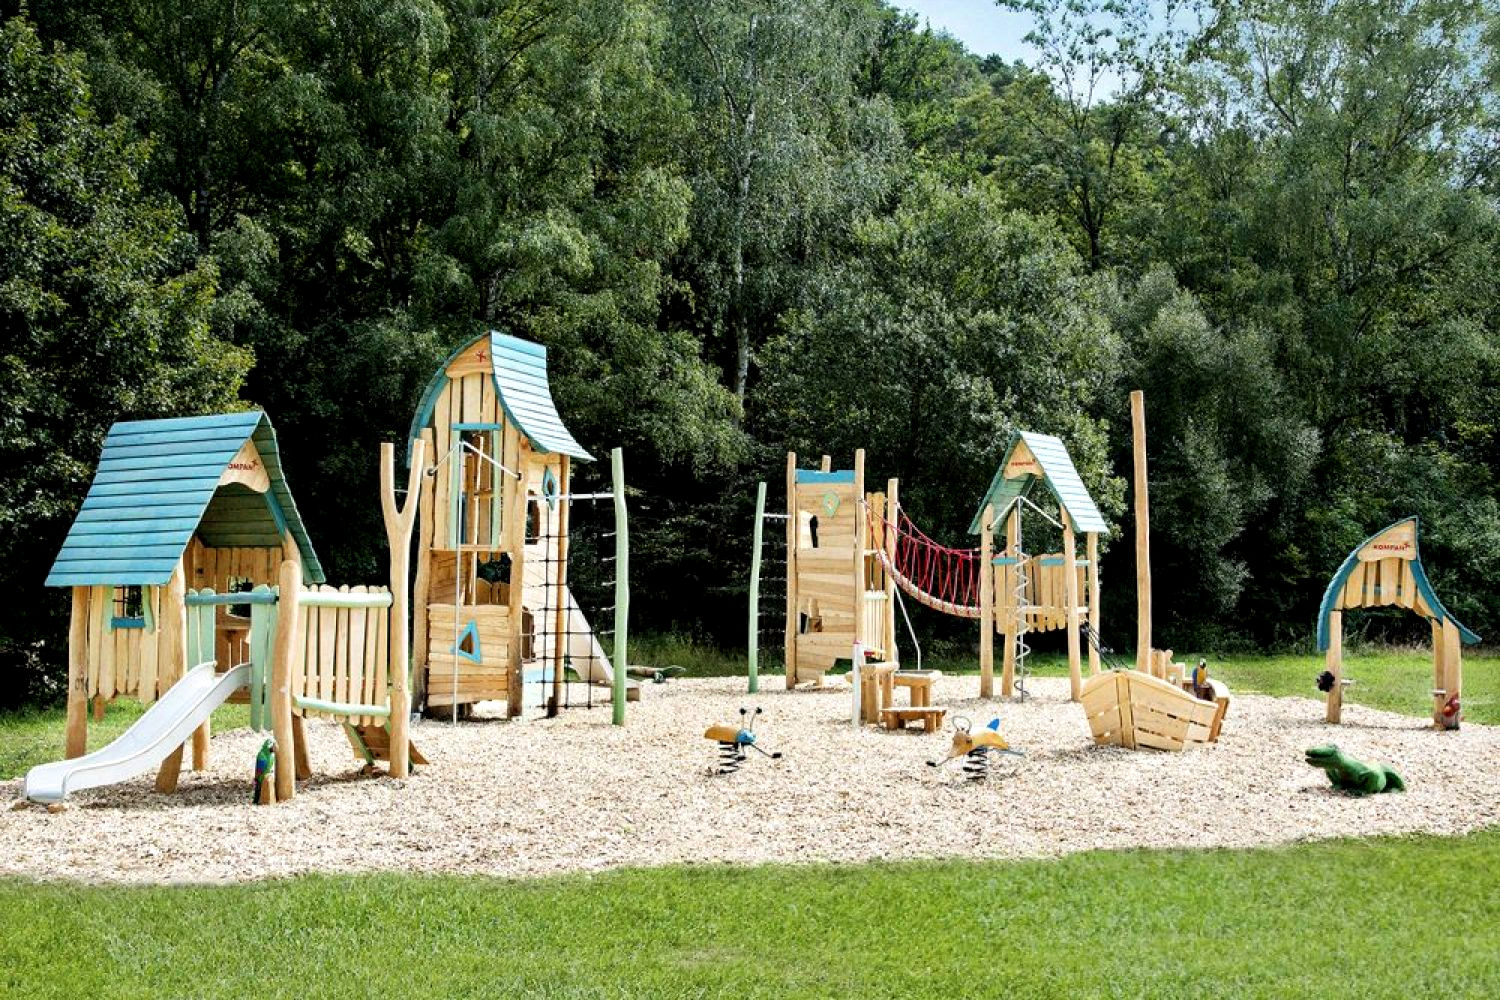 MULTI DECK PLAY TOWER WITH BANISTER BARS ADA